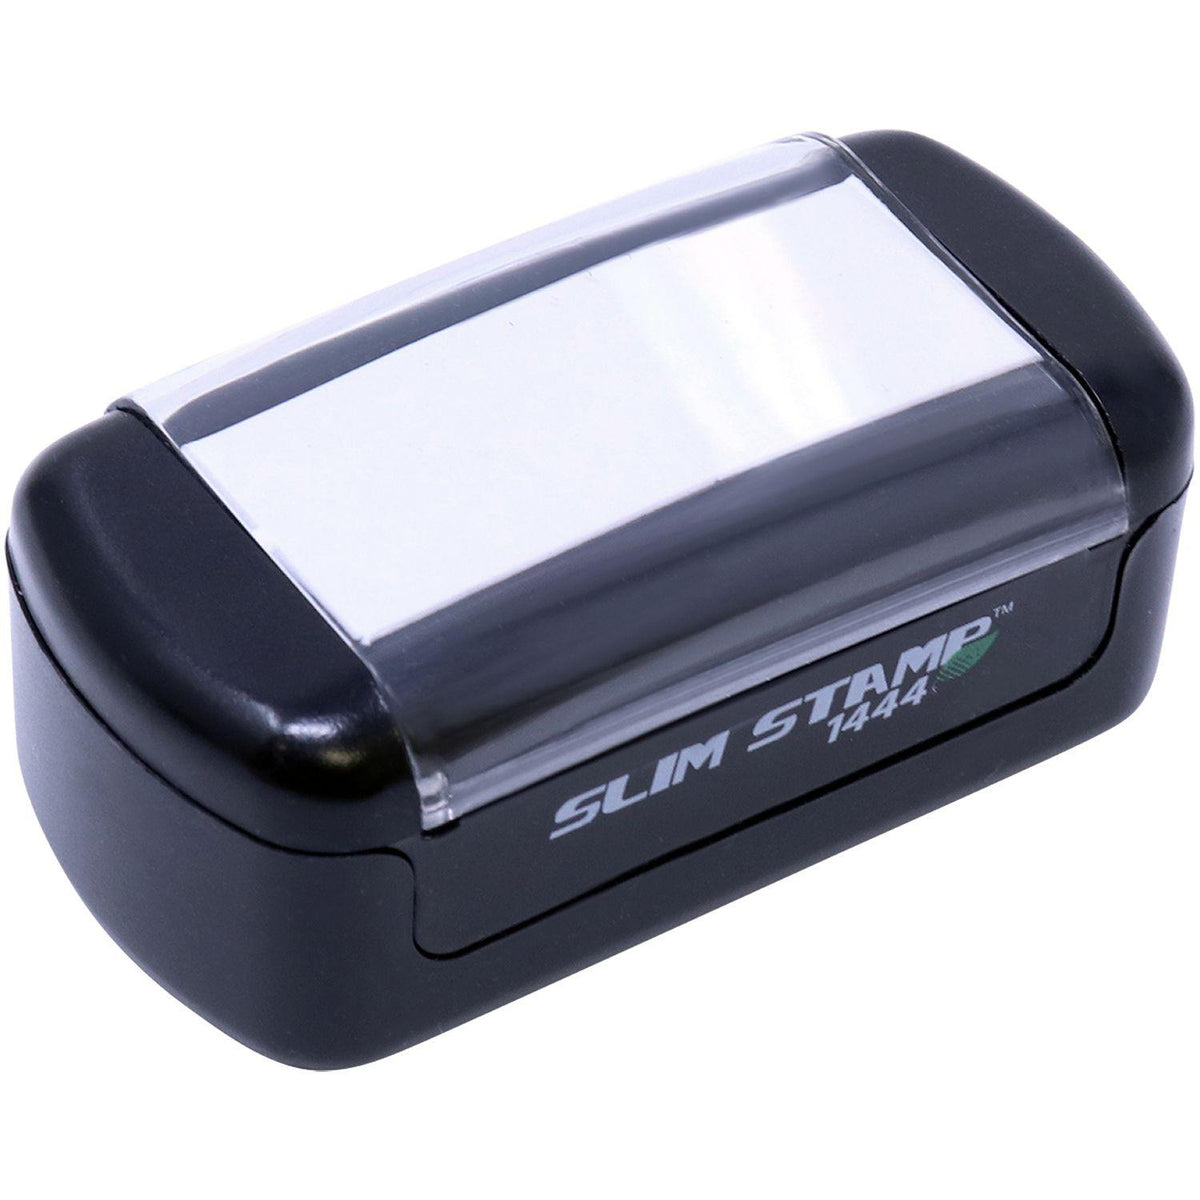 Slim Pre-Inked Archivar Stamp - Engineer Seal Stamps - Brand_Slim, Impression Size_Small, Stamp Type_Pre-Inked Stamp, Type of Use_Office